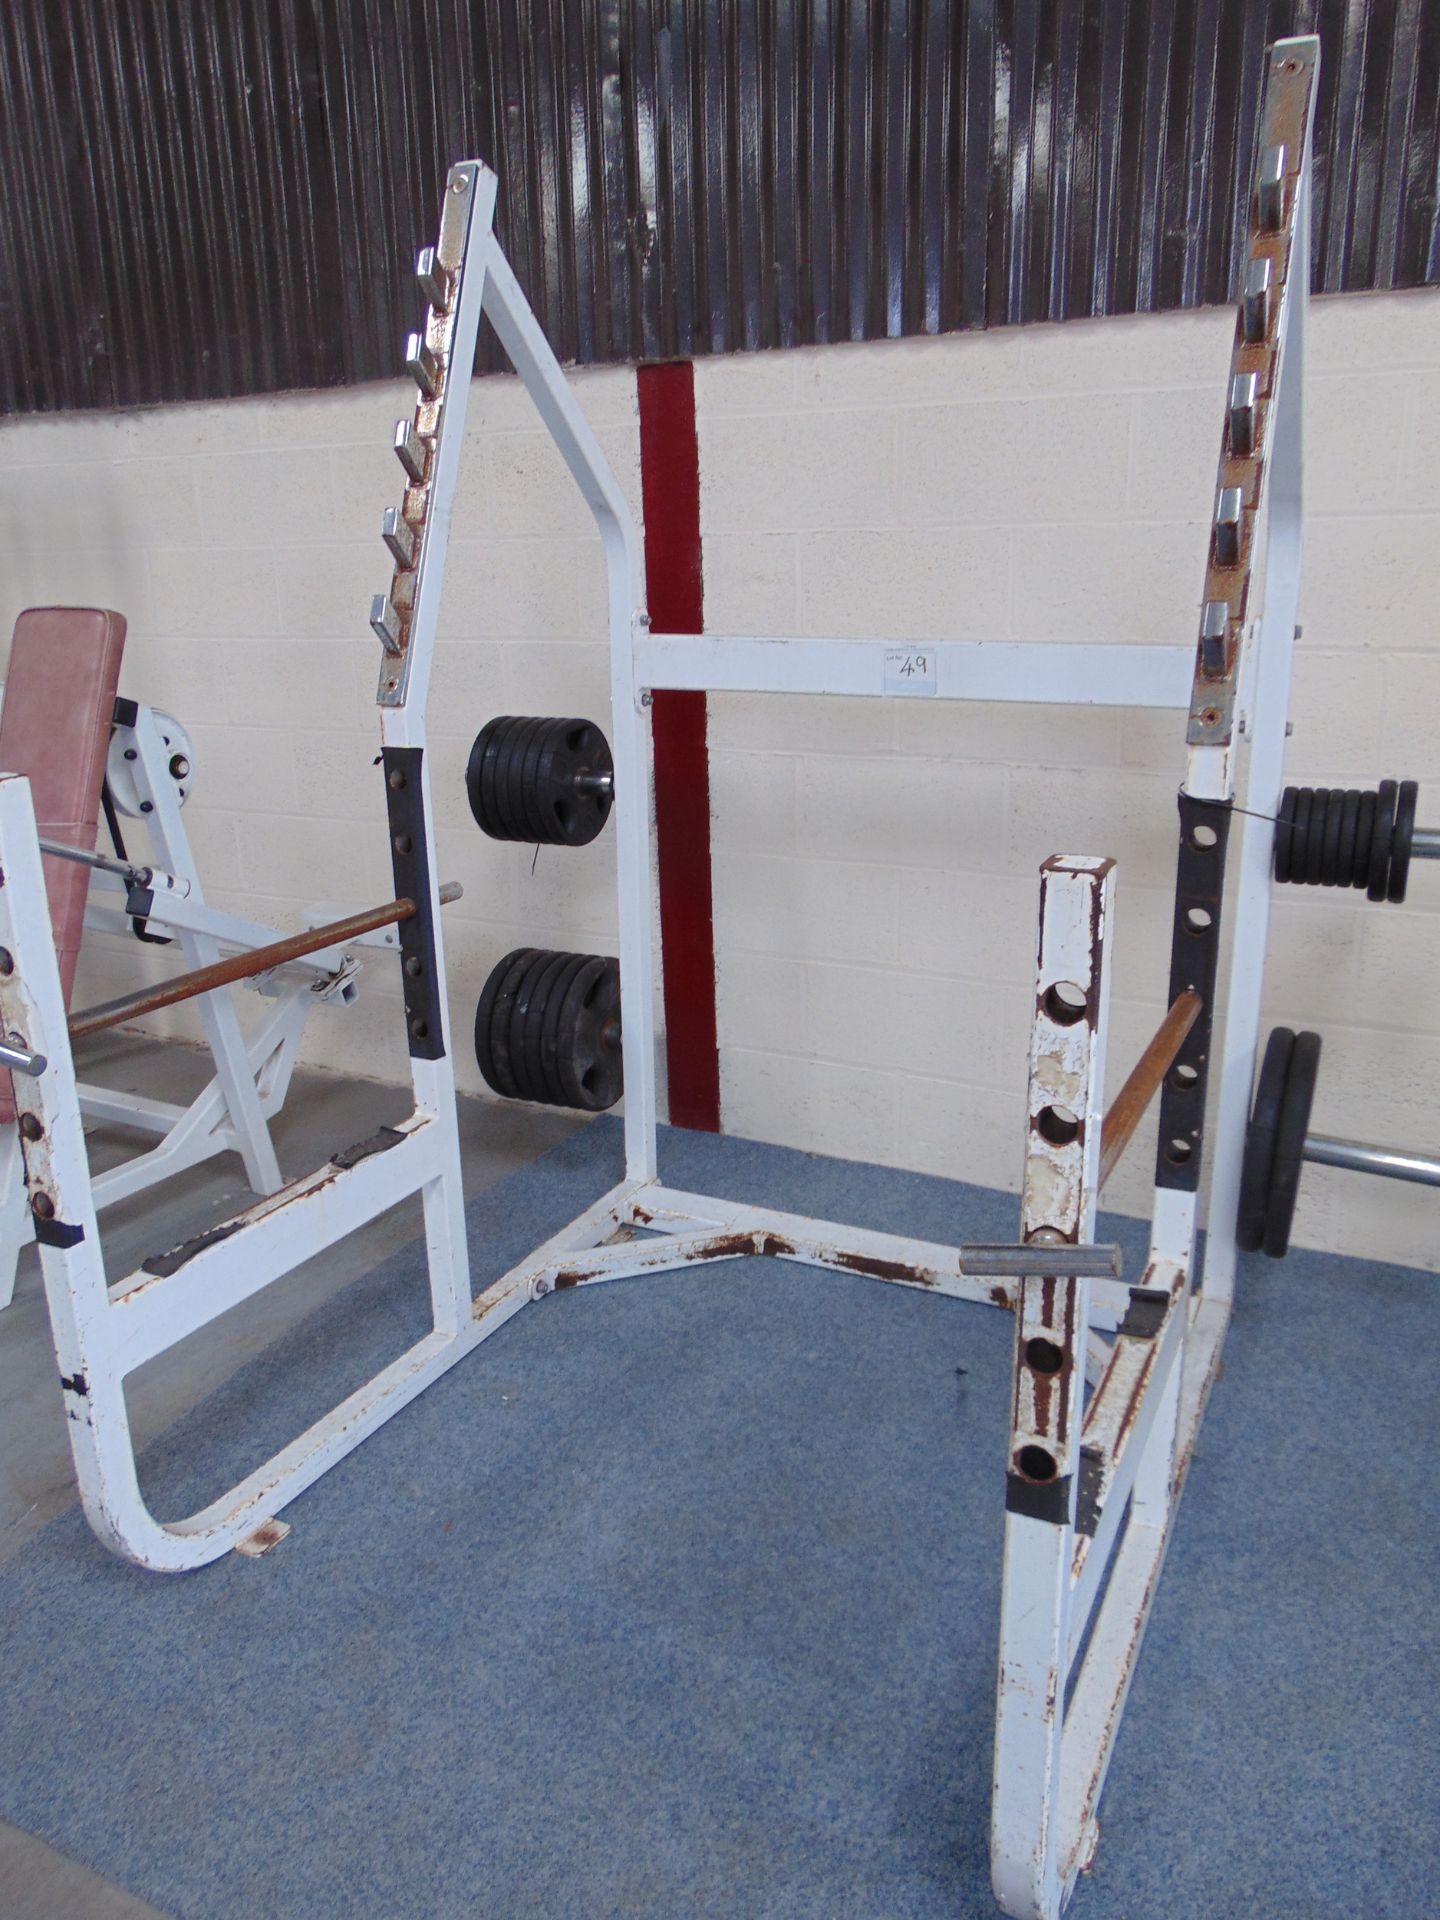 Squat Rack With Weights Included - Bild 2 aus 2